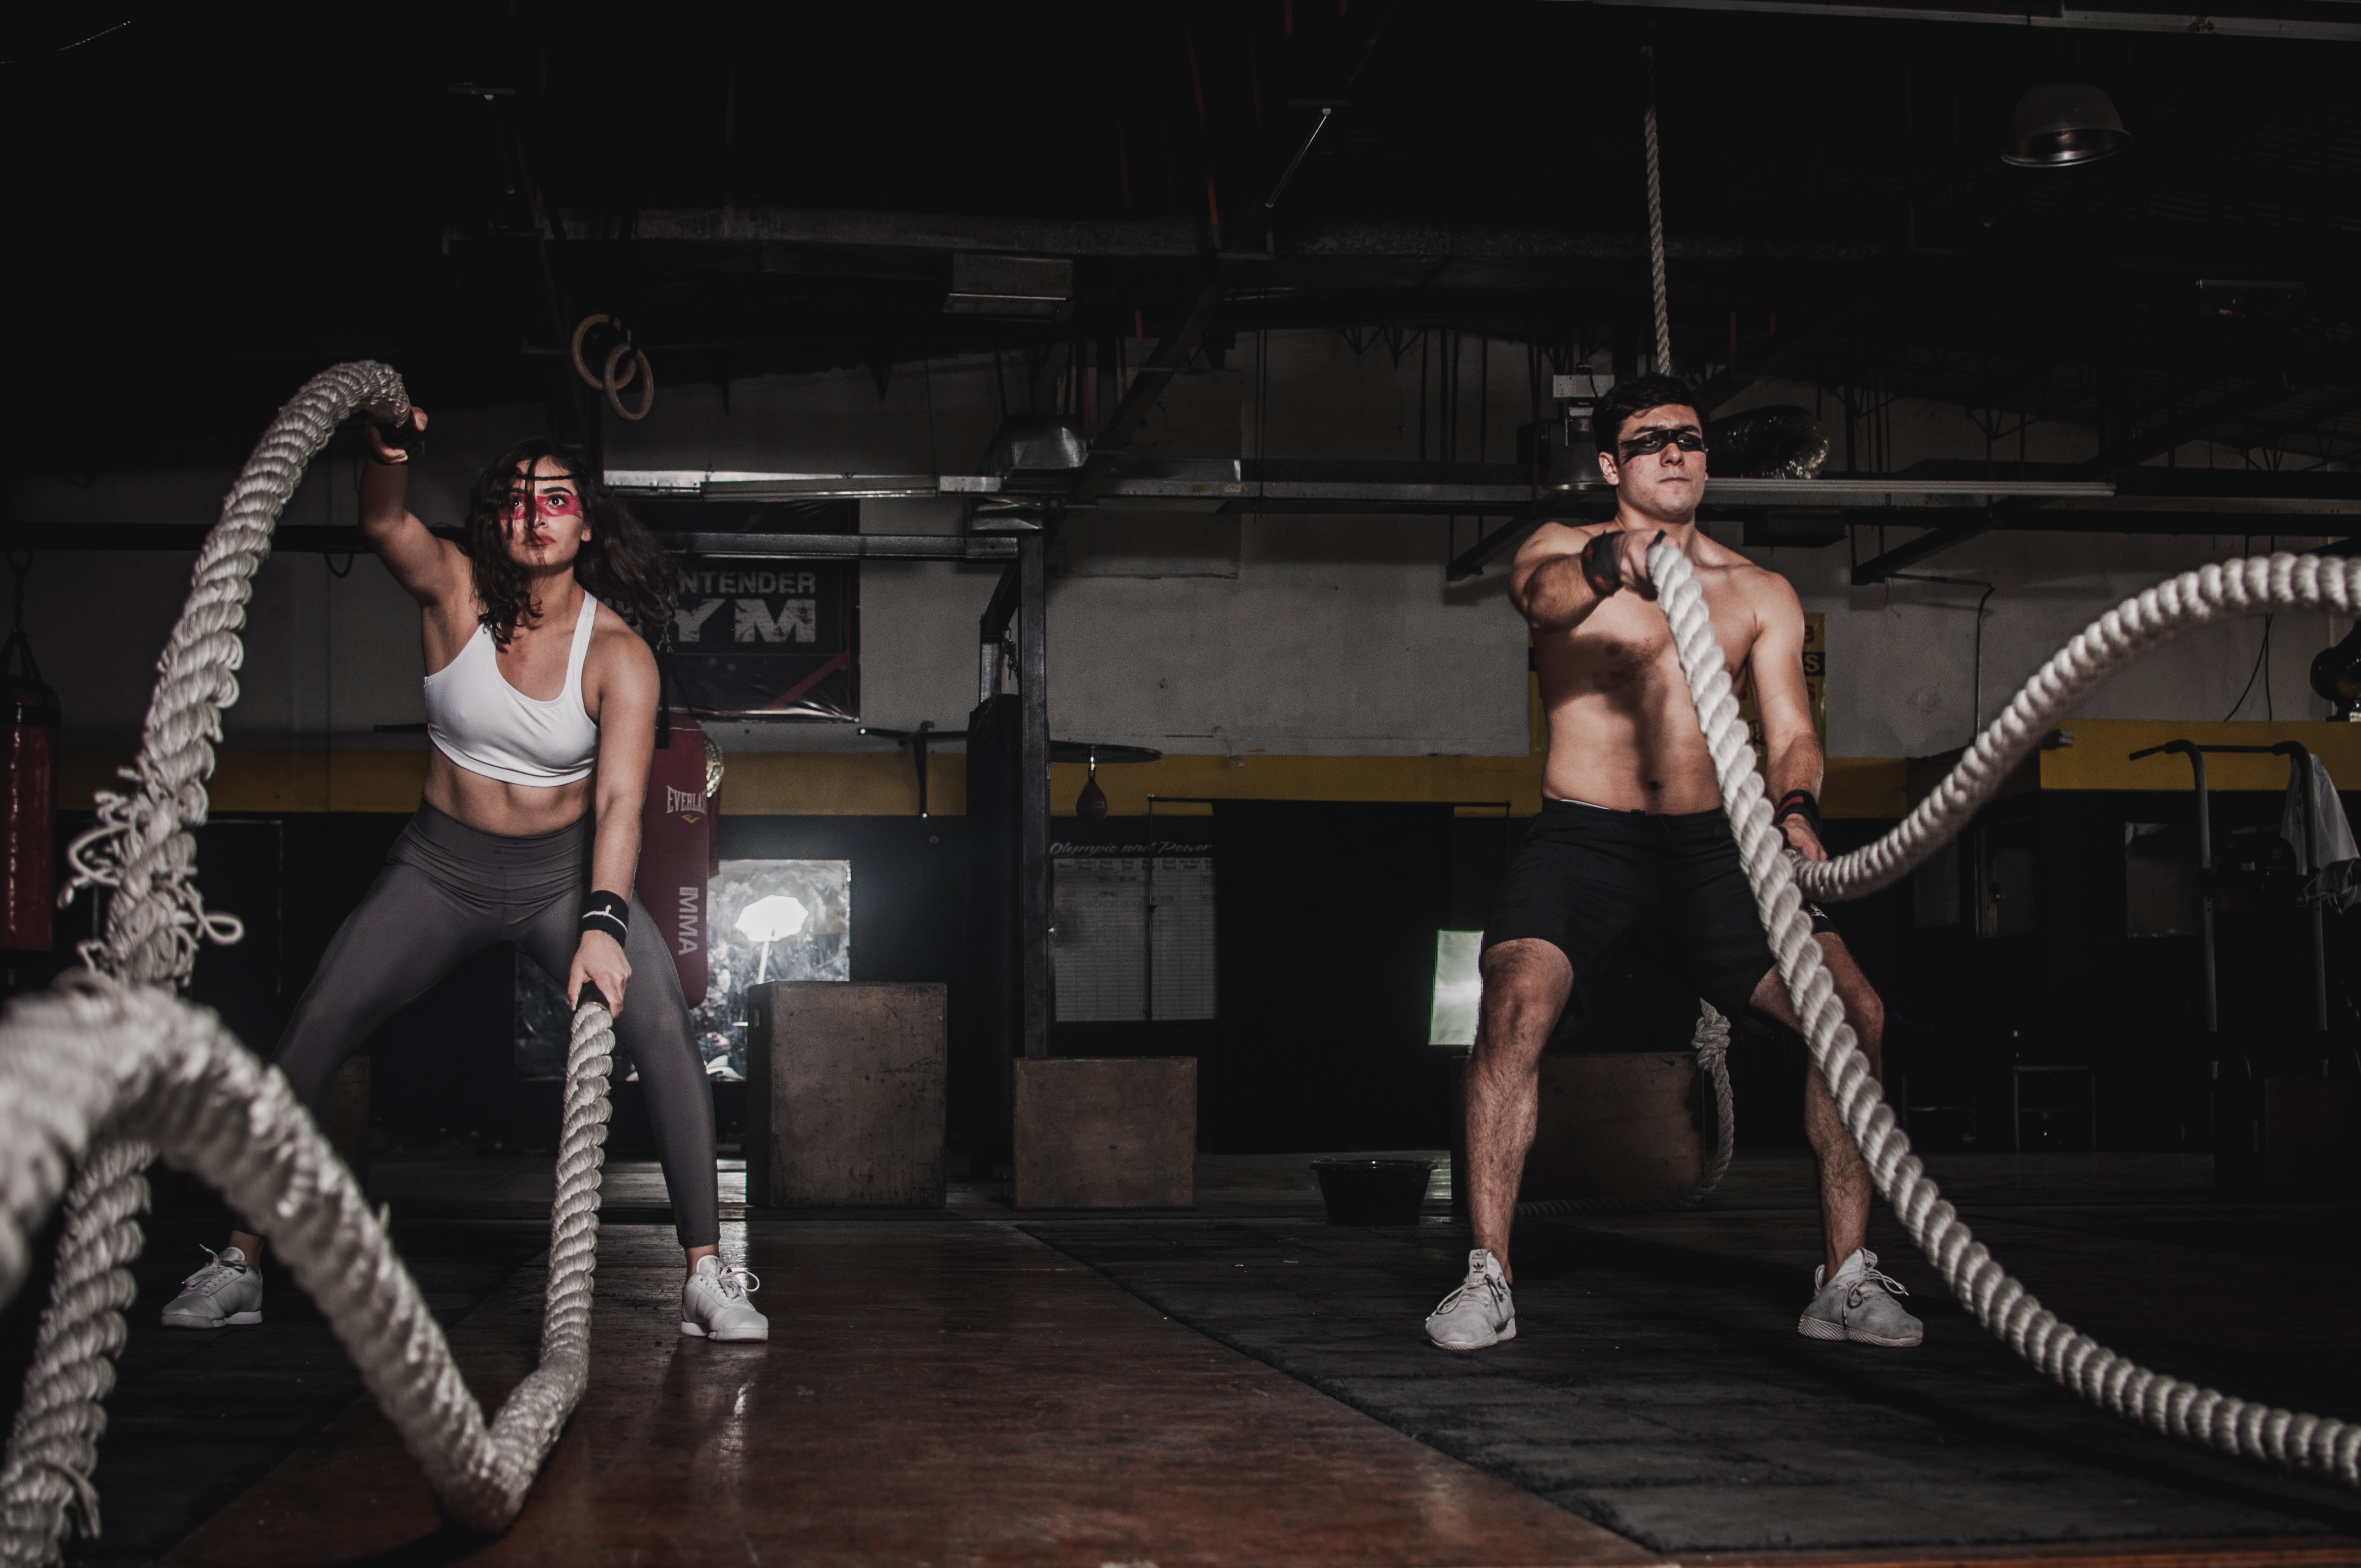 Two people working out with ropes.